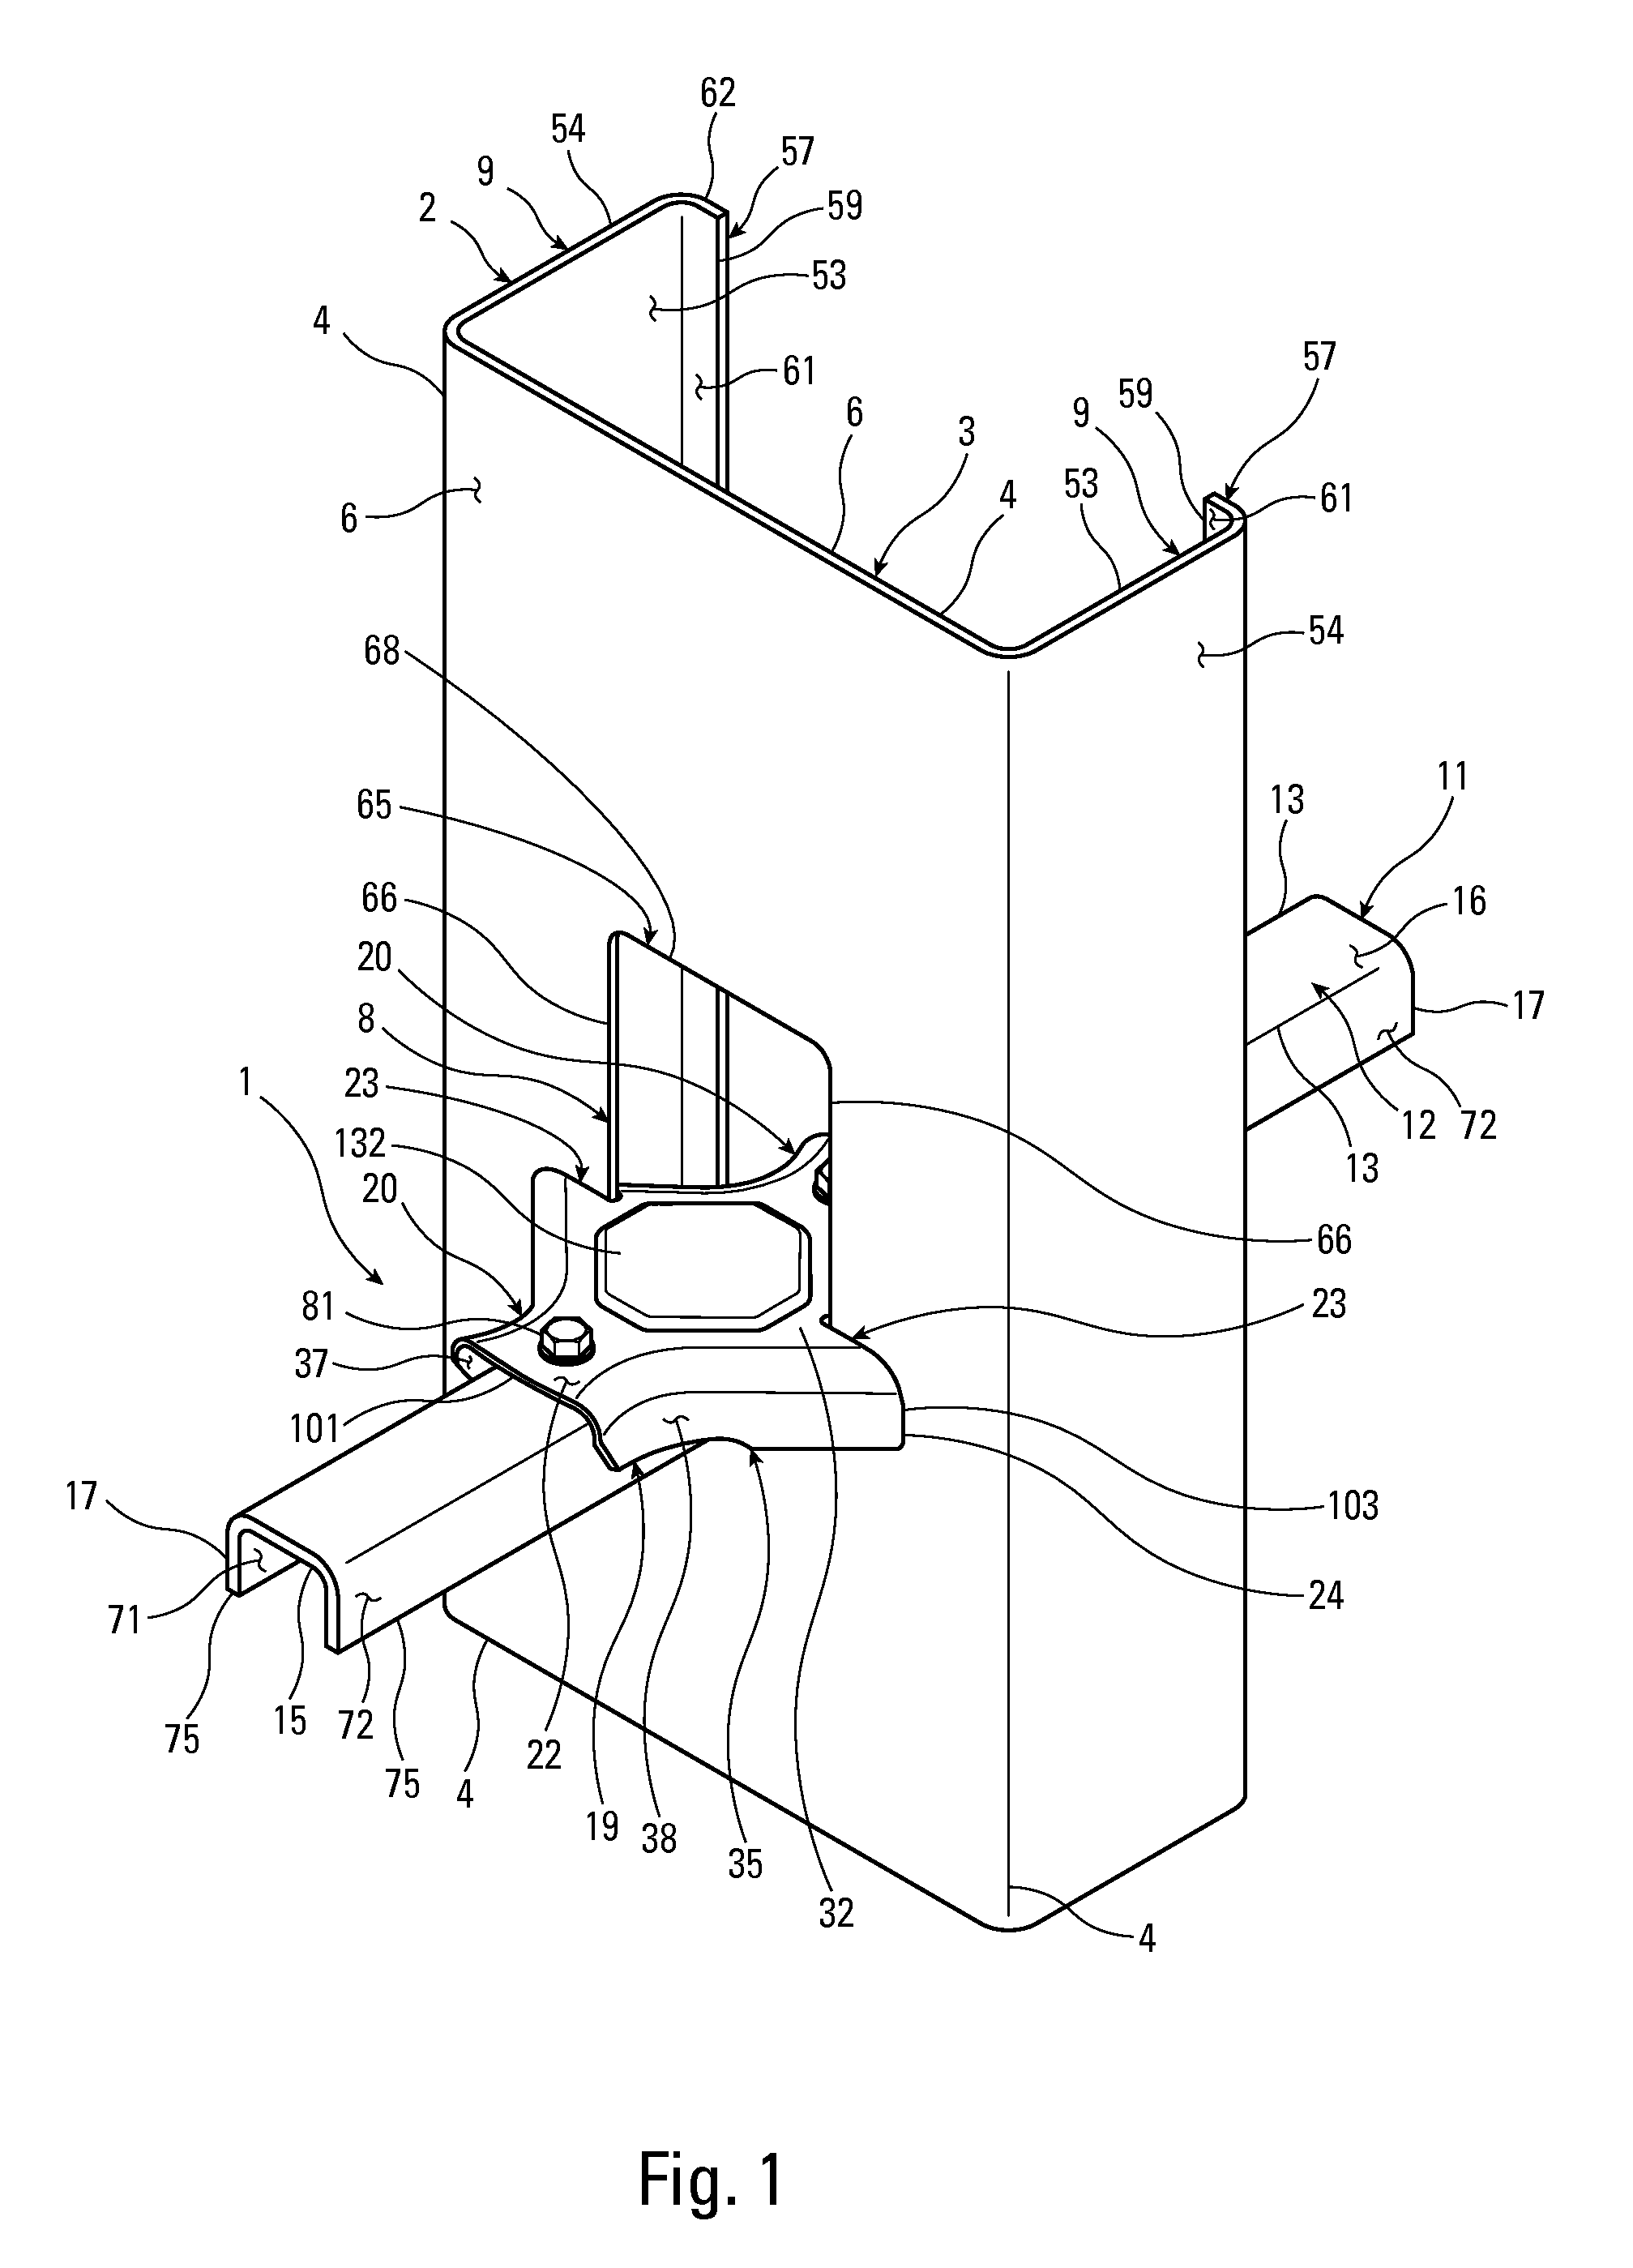 Teardrop and offset notch bridging connector